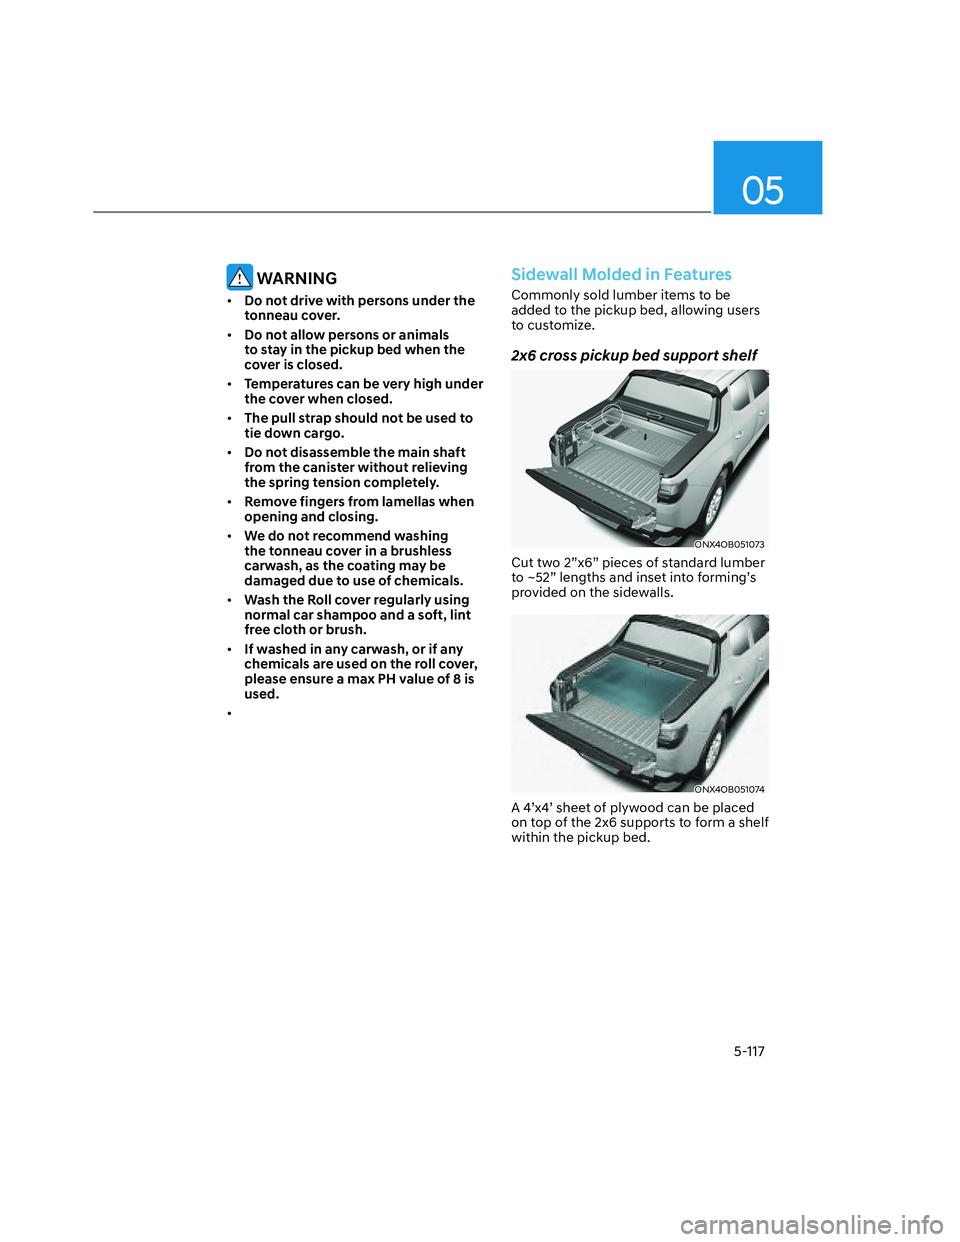 HYUNDAI SANTA CRUZ 2022  Owners Manual 05
5-117
 WARNING
• Do not drive with persons under the 
tonneau cover.
• Do not allow persons or animals 
to stay in the pickup bed when the 
cover is closed.
• Temperatures can be very high un